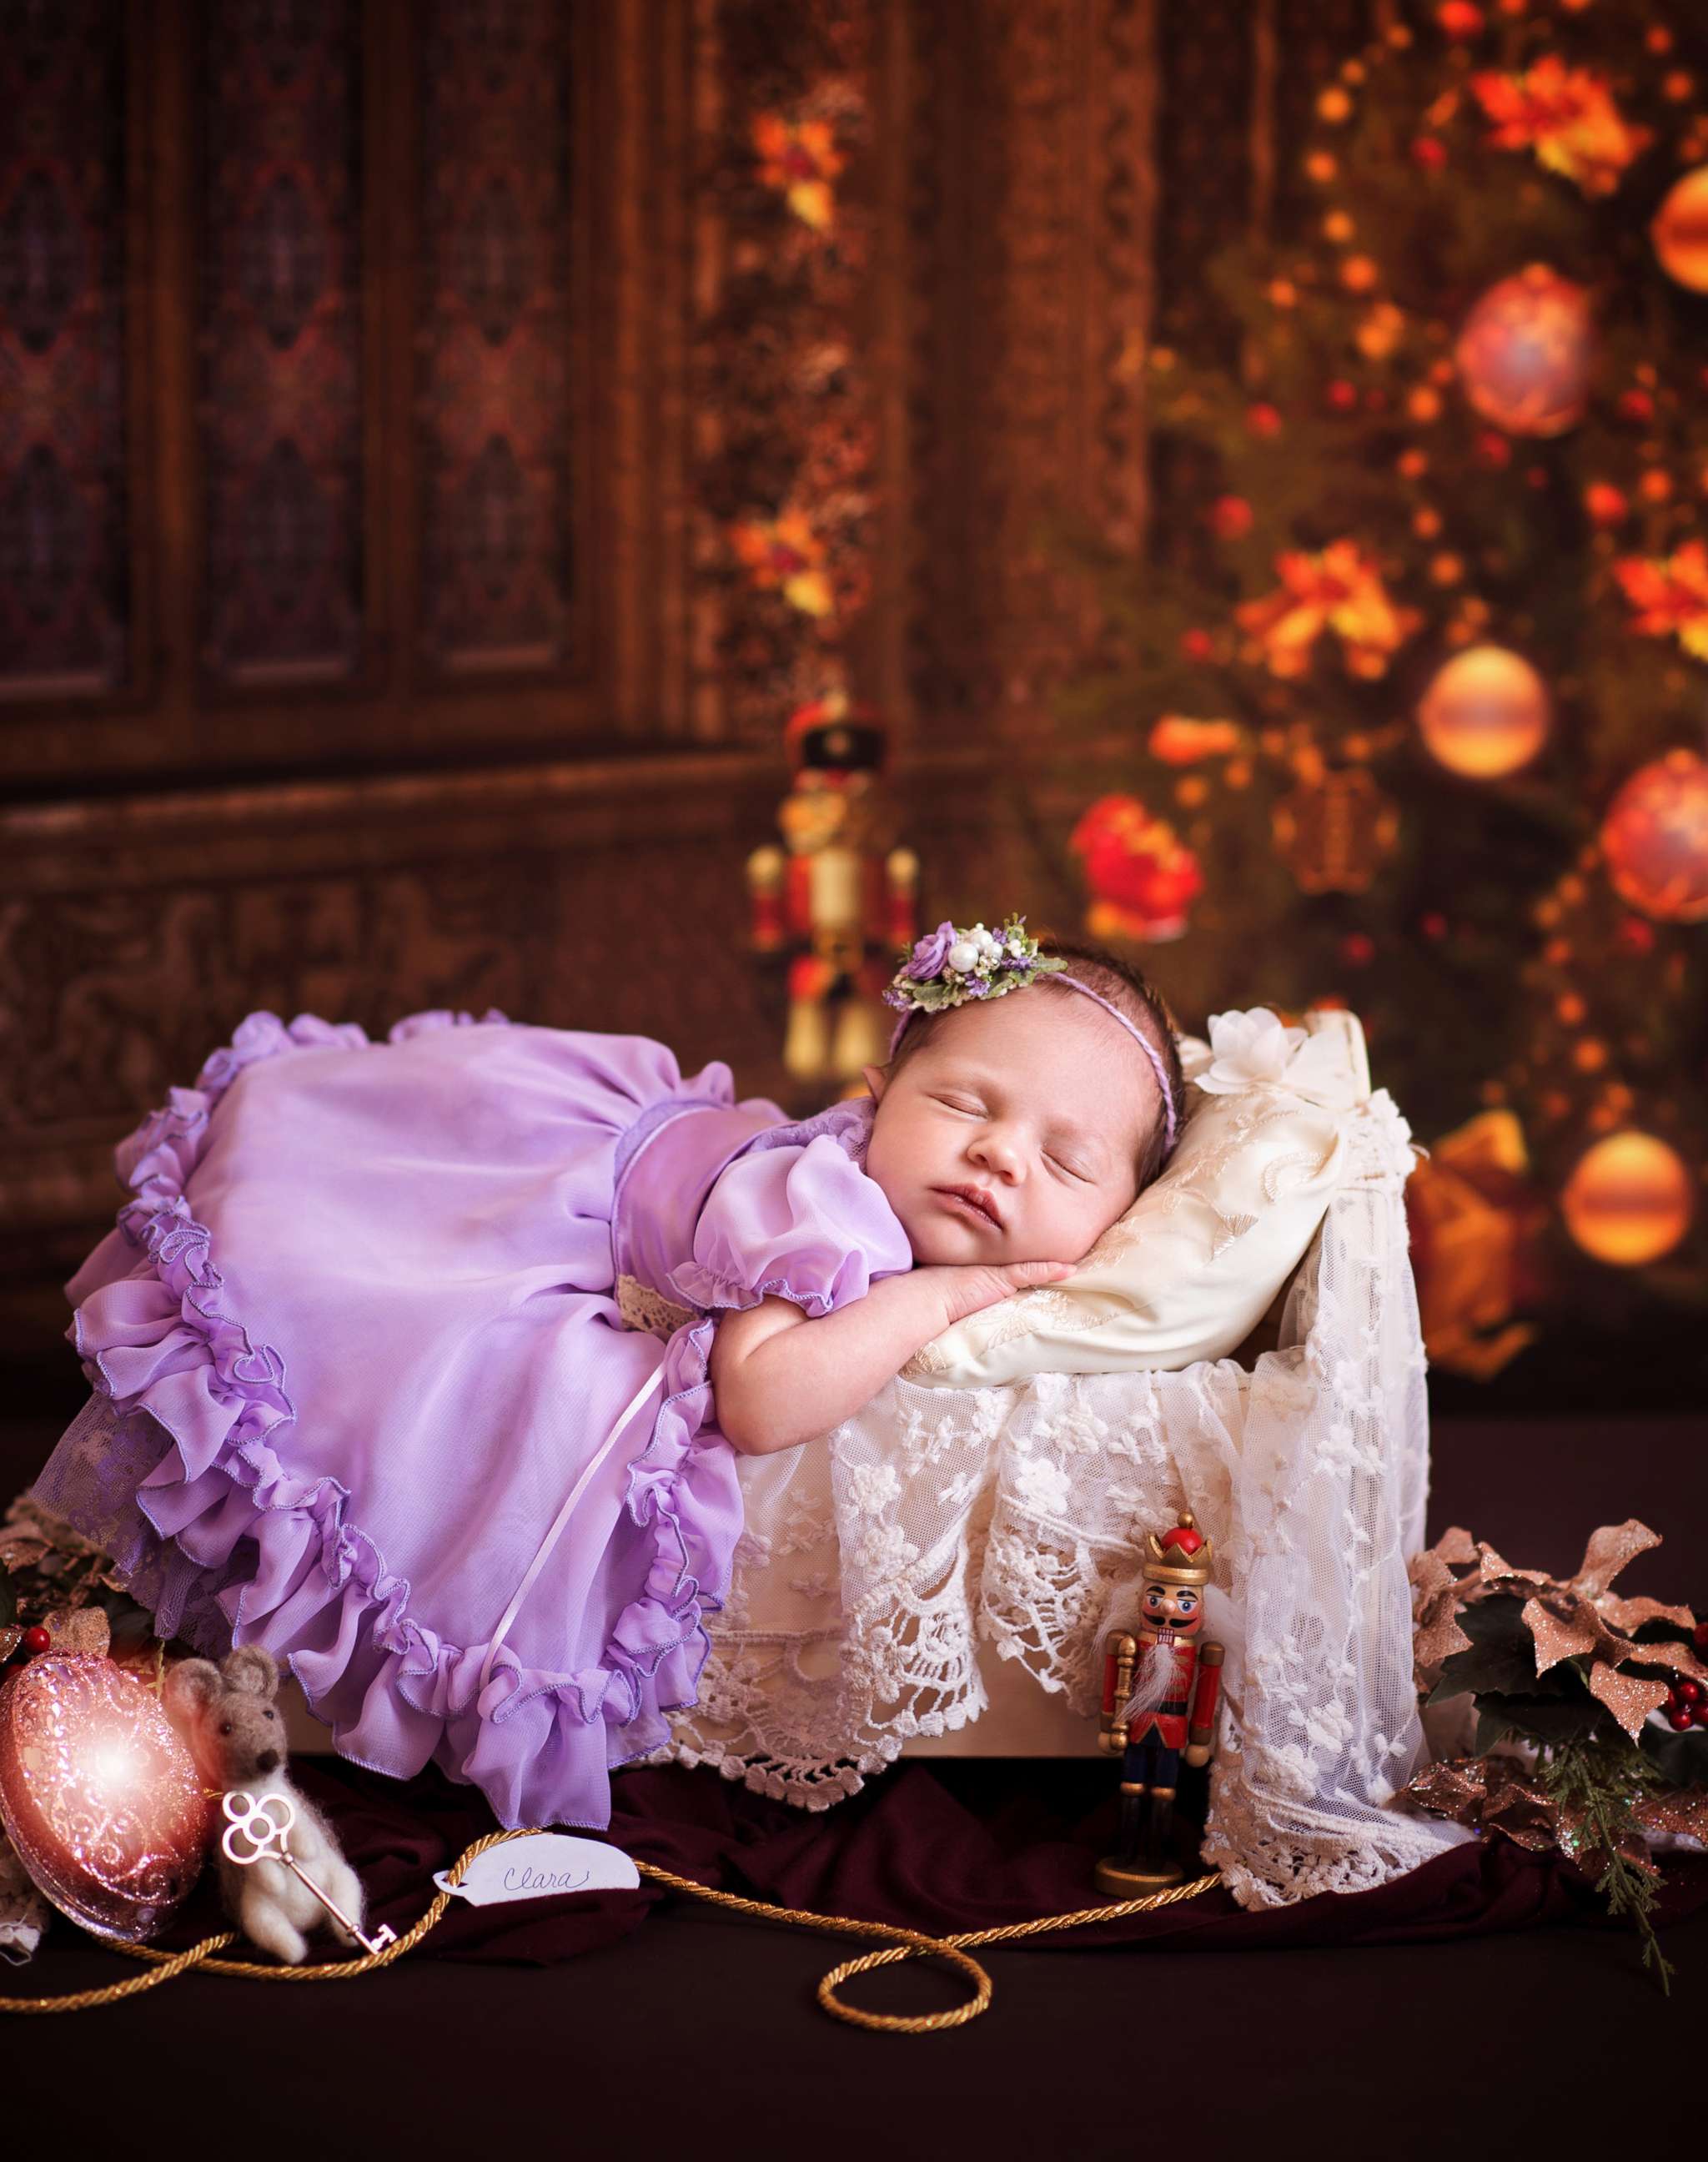 PHOTO: Babies pose as characters from The Nutcracker in a photo shoot.